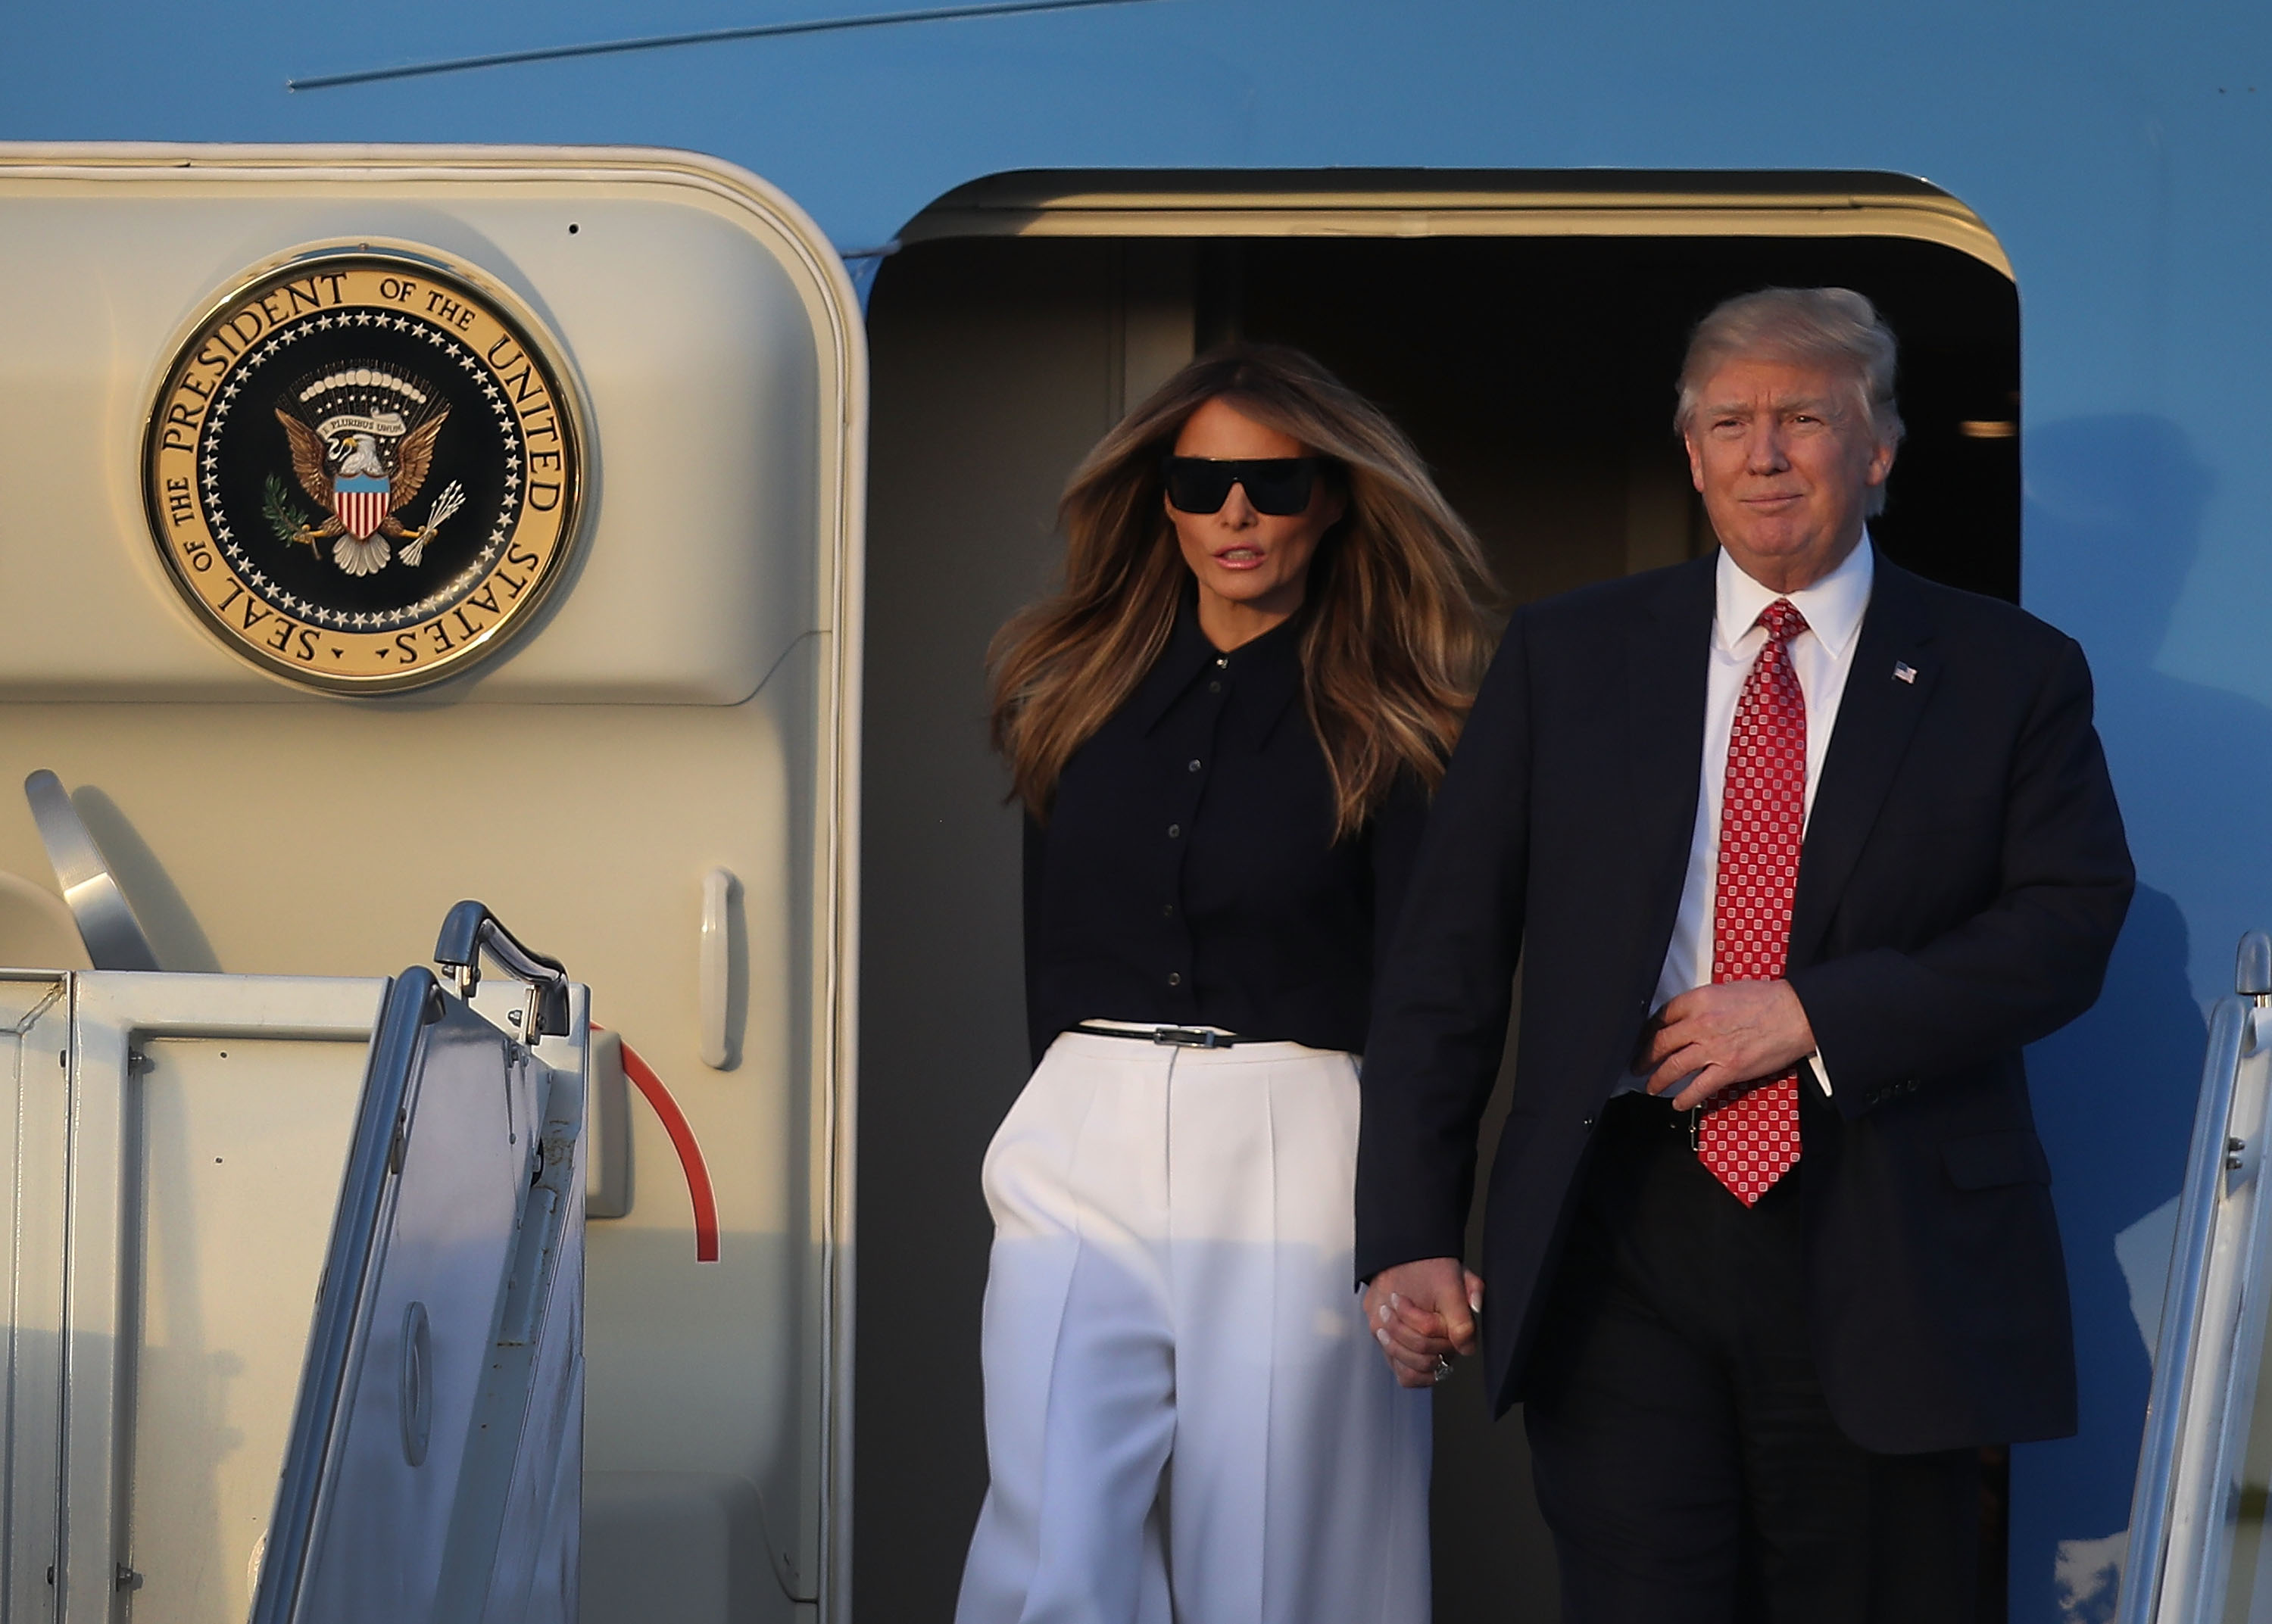 President Donald Trump and his wife Melania Trump arrive on Air Force One at the Palm Beach International airport as they prepare to spend part of the weekend with Japanese Prime Minister Shinzo Abe and his wife Akie Abe at Mar-a-Lago resort on February 10, 2017 in West Palm Beach, Florida. (Joe Raedle—Getty Images)